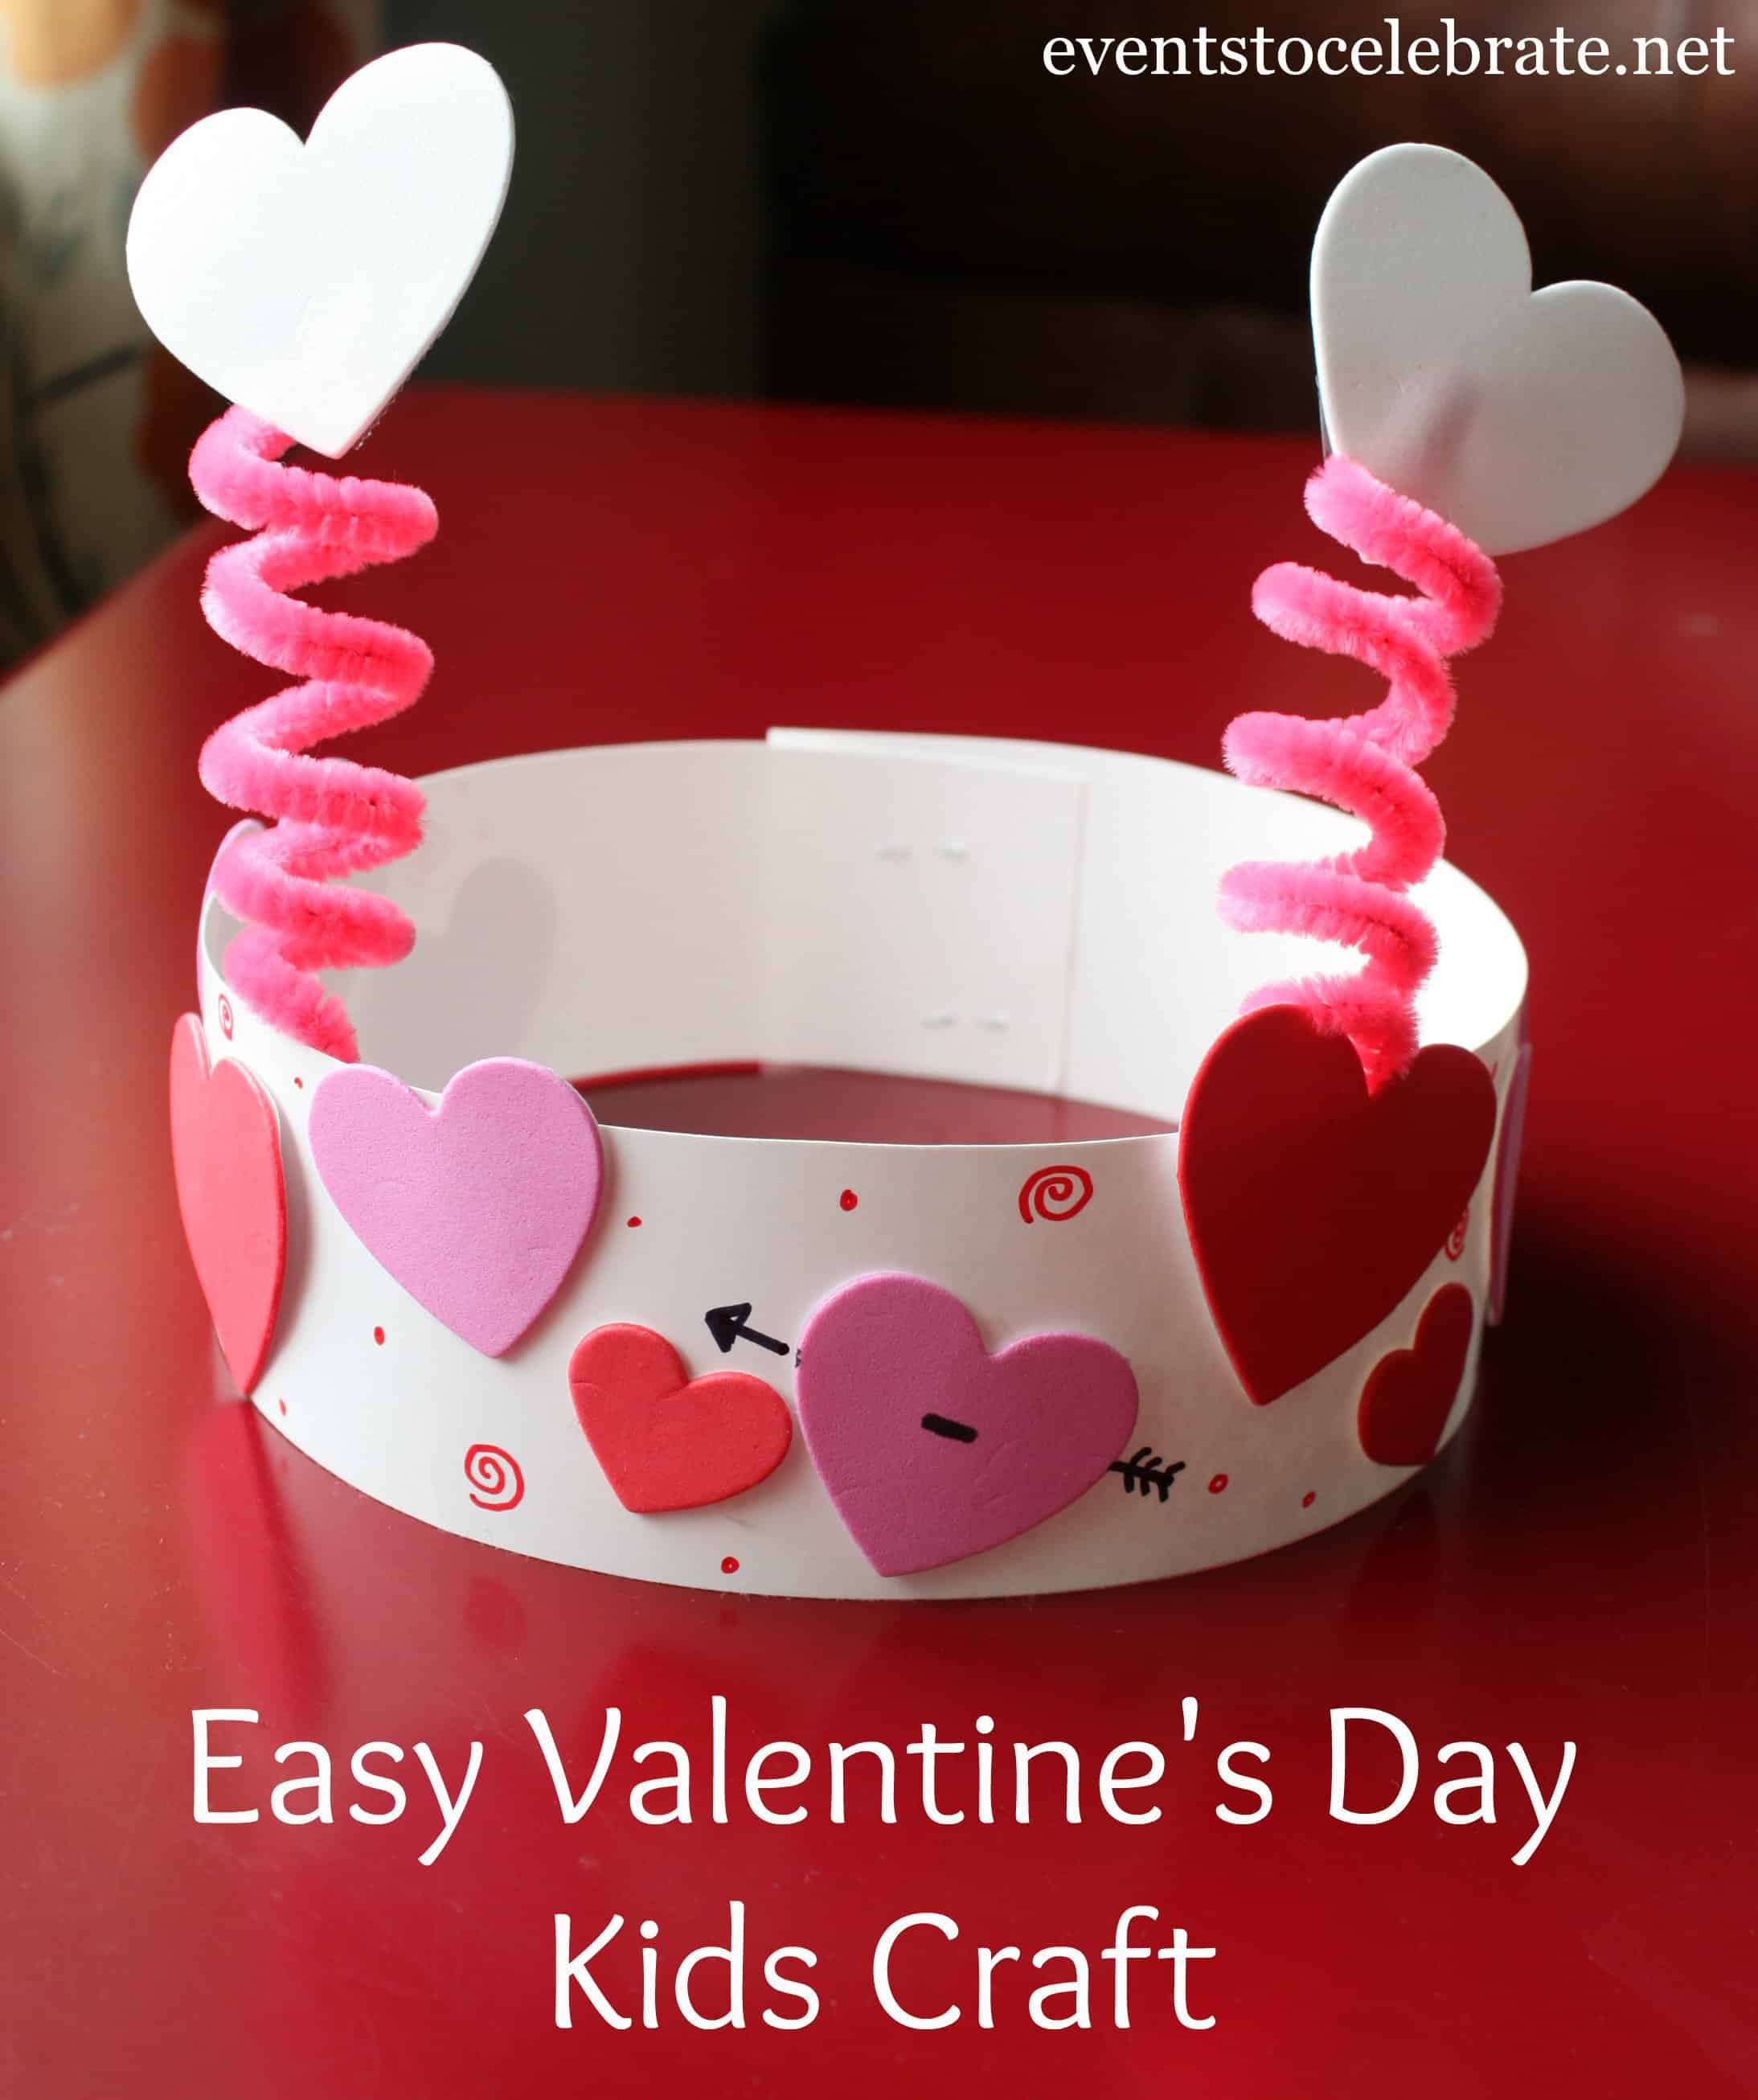 Valentine's Day Party Activities - Party Ideas for Real People